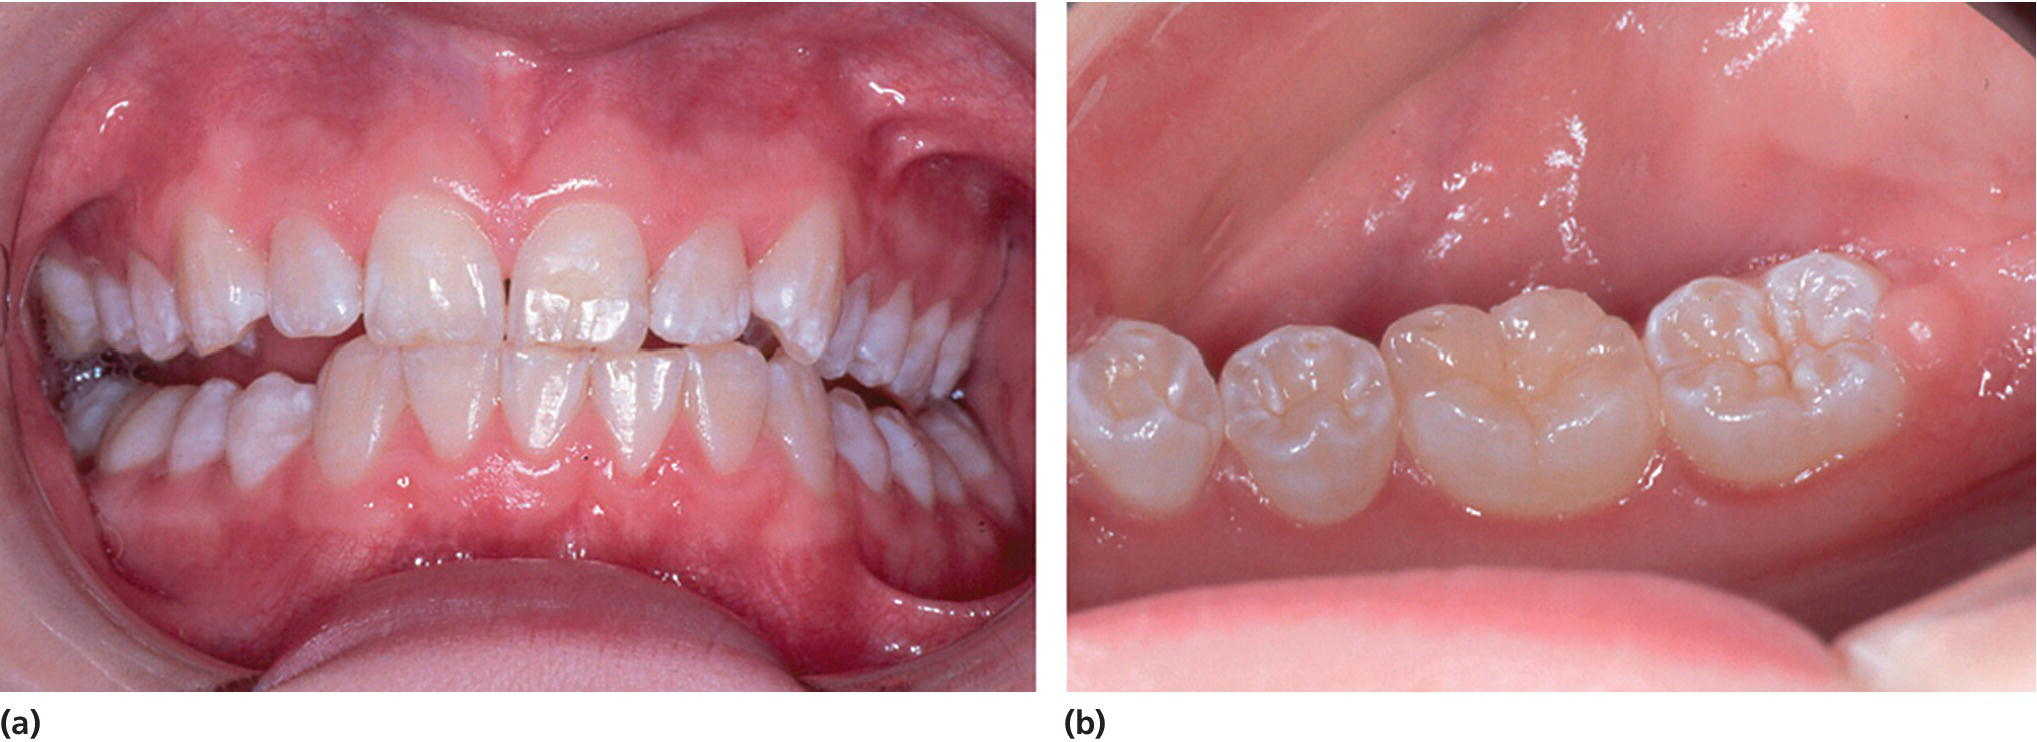 2 Photos of teeth and gums (left) and of the left molars and 2nd cuspid of a 15-year-old girl demonstrating mild fluorosis (right).